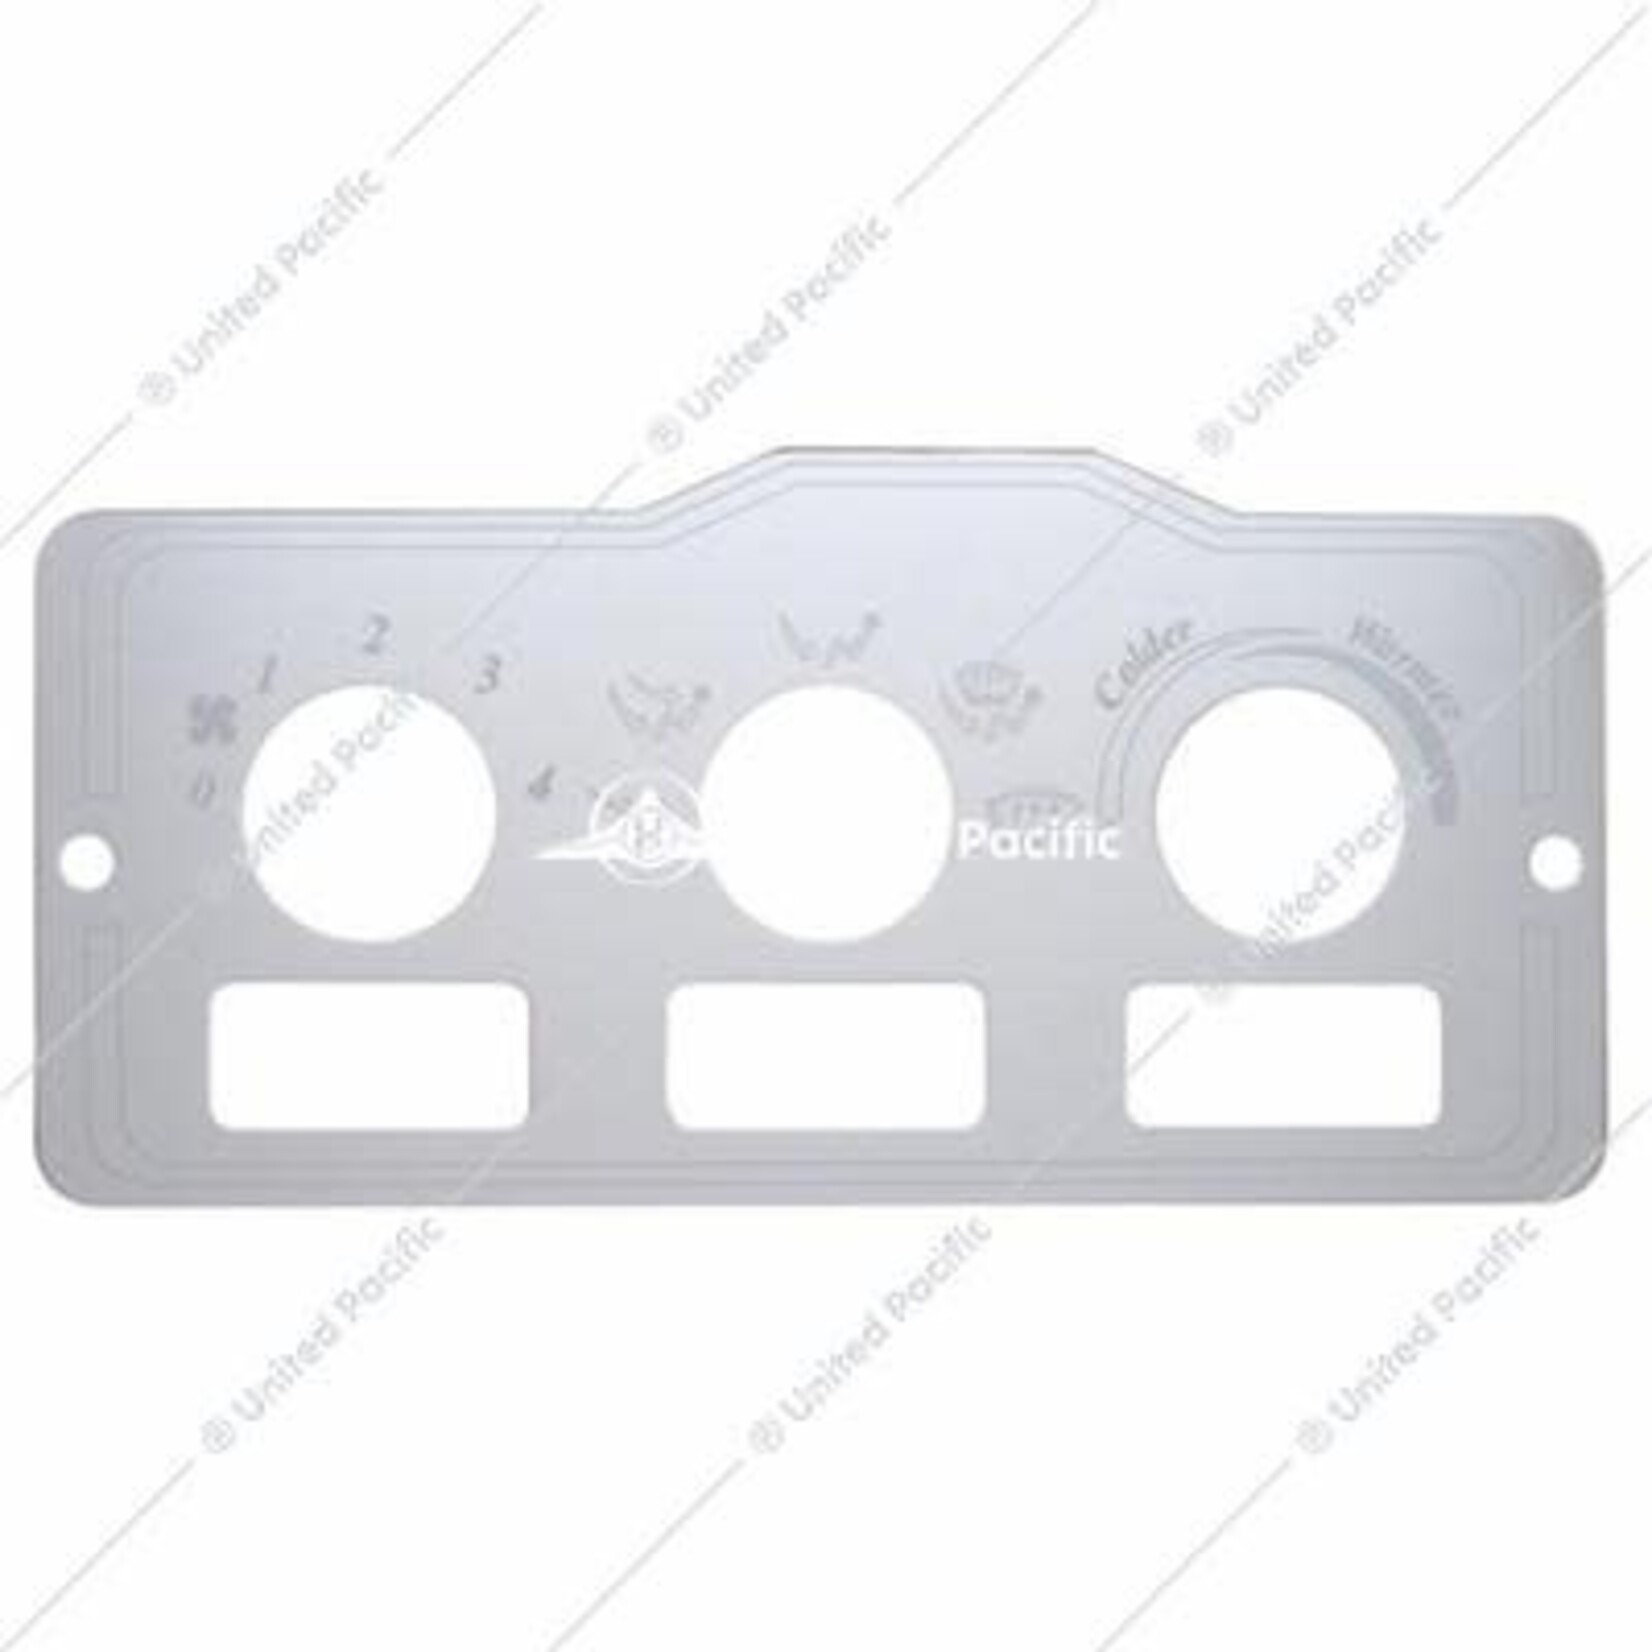 Peterbilt Stainless A/C Control Plate - 3 Square Opening